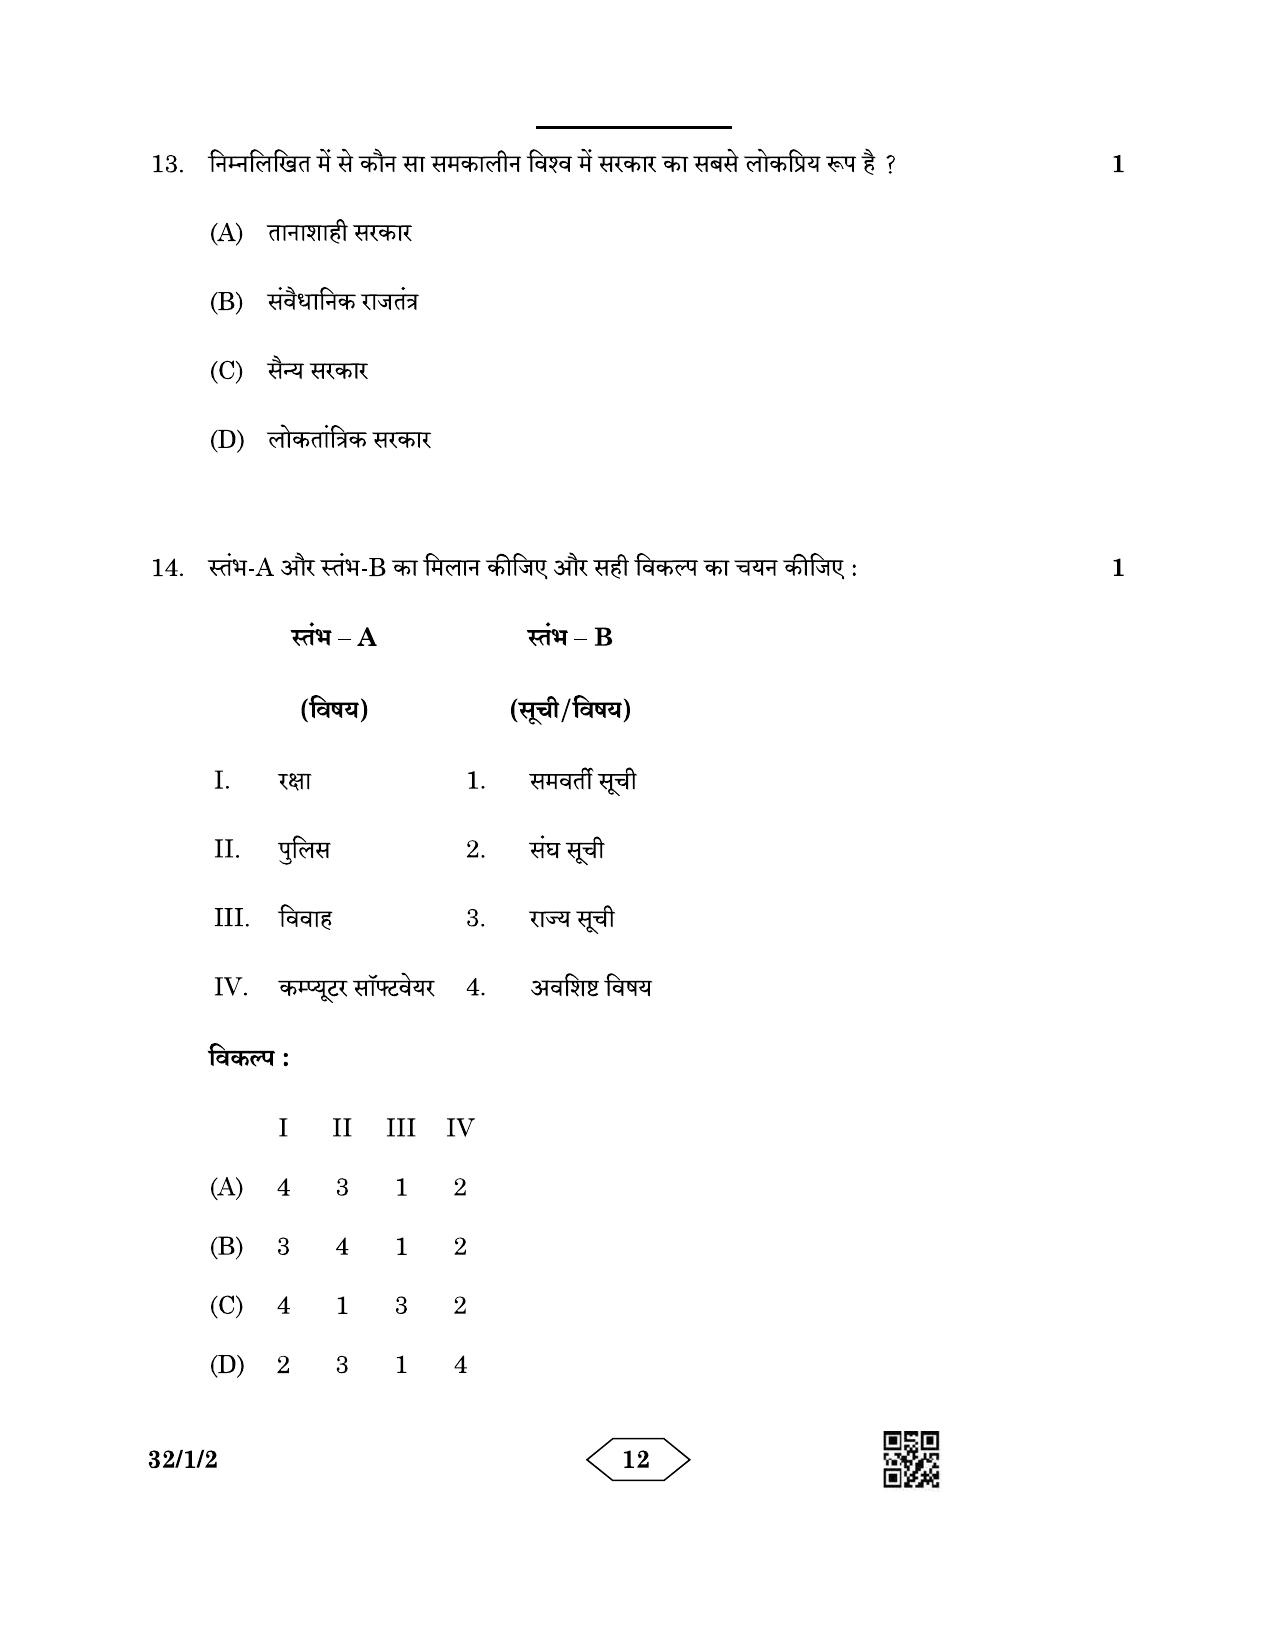 CBSE Class 10 32-1-2 Social Science 2023 Question Paper - Page 12